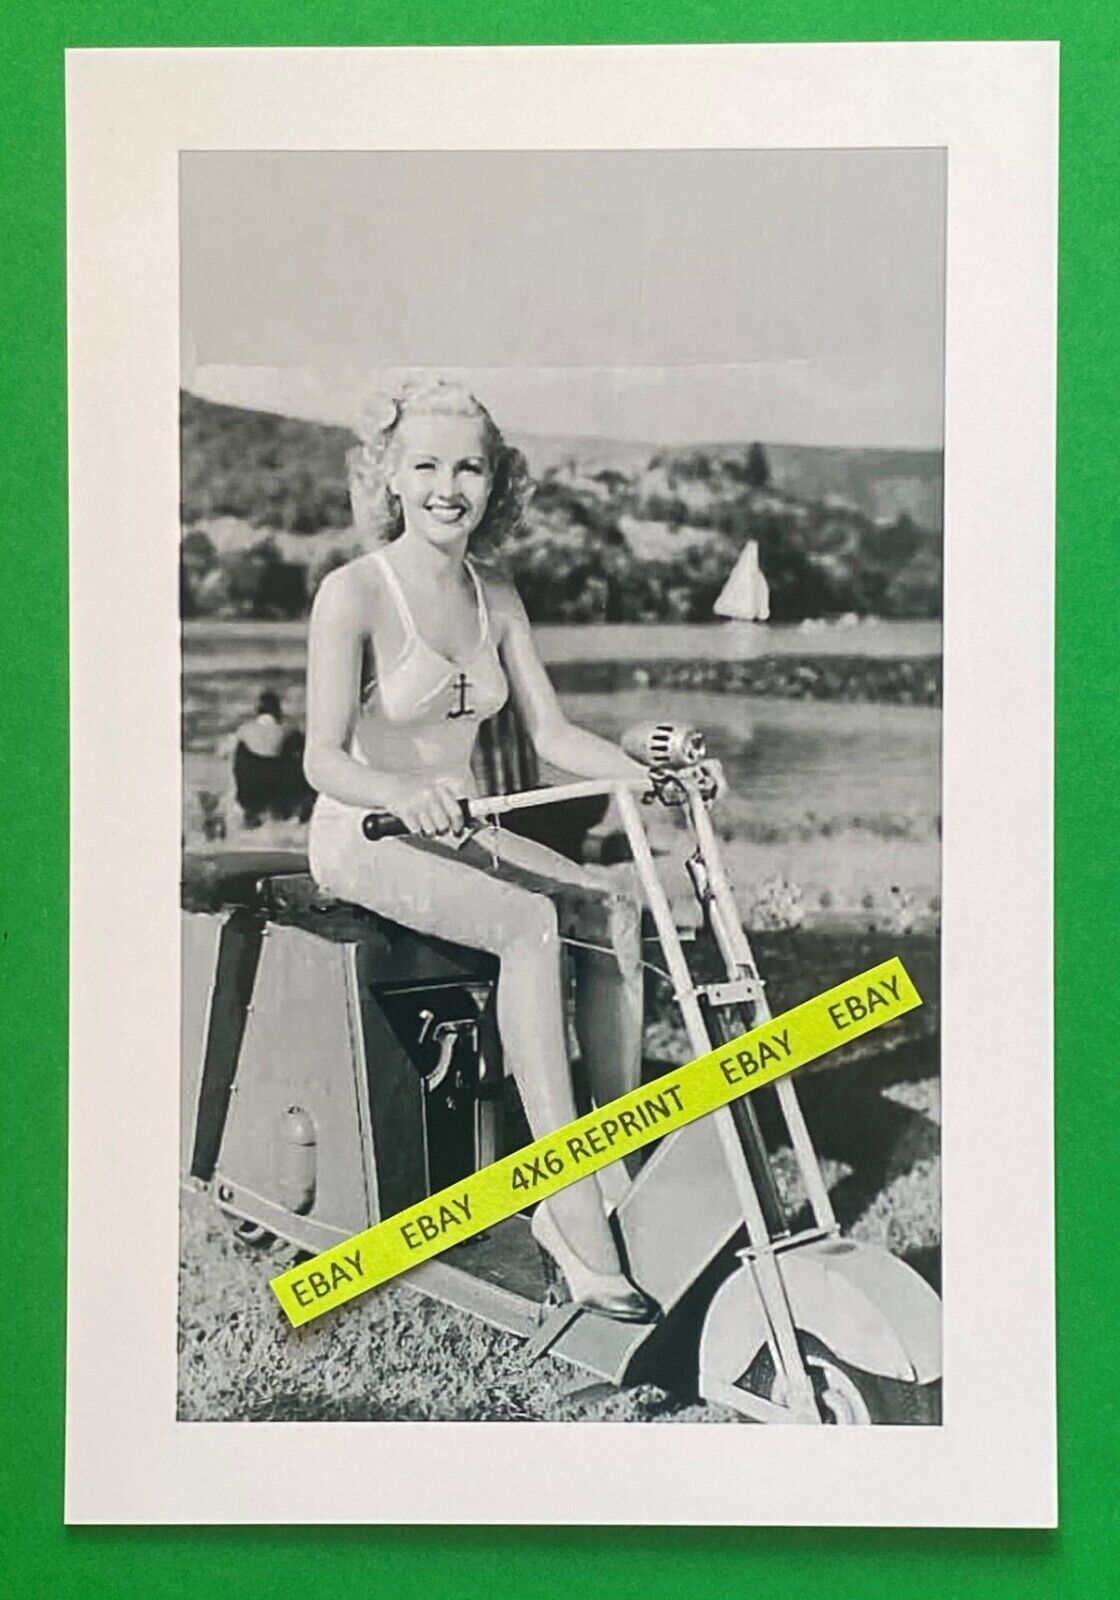 Found 4X6 PHOTO of Pretty Woman on Old Cushman Motor Scooter Actor Betty Grable